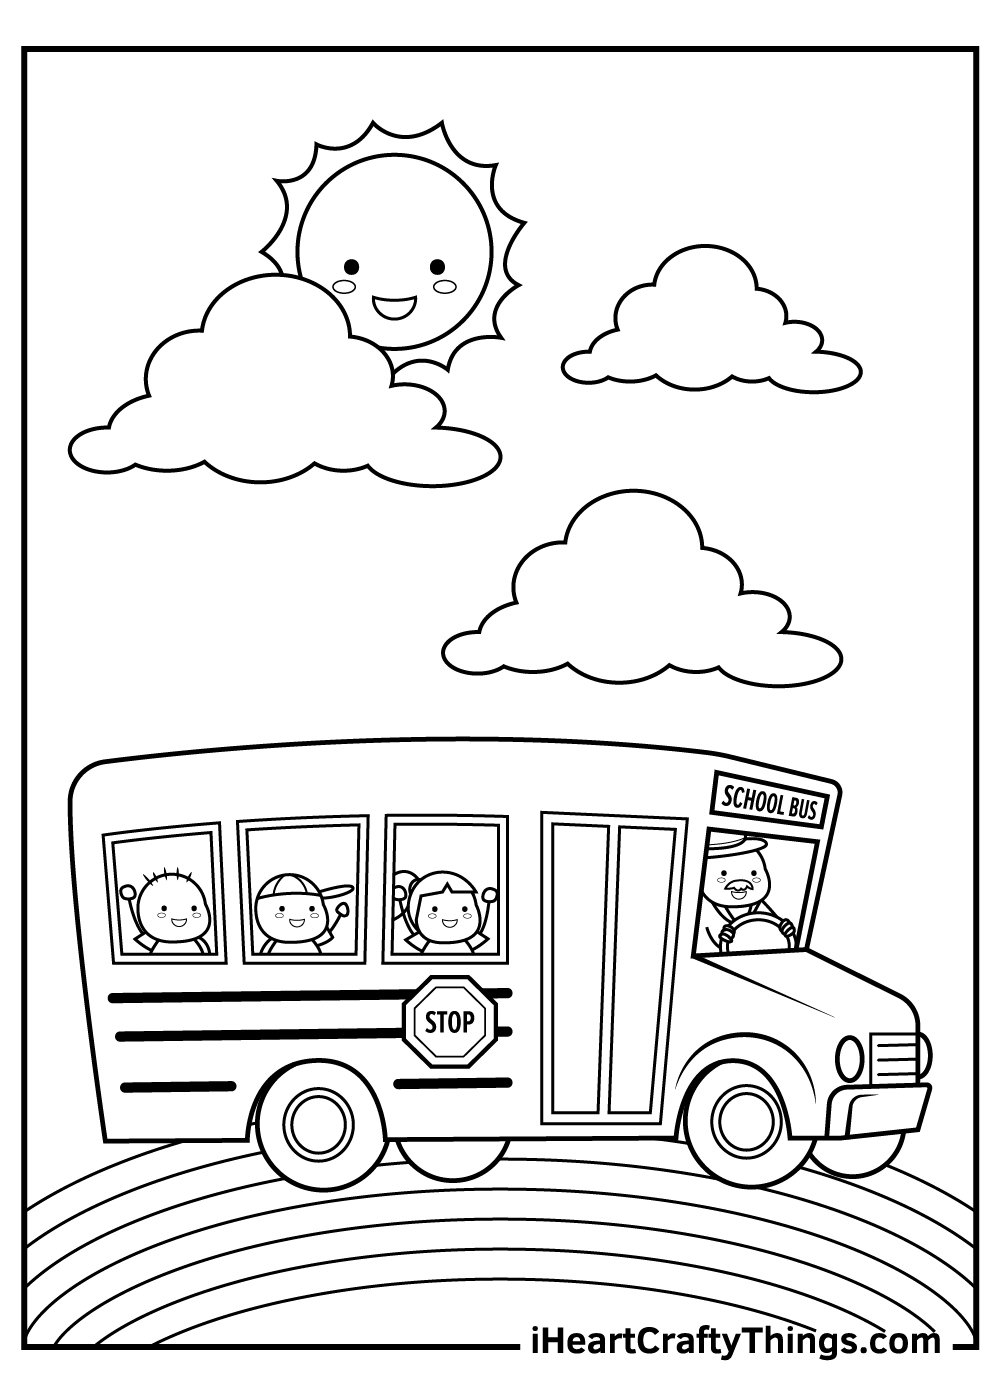 School bus coloring pages updated